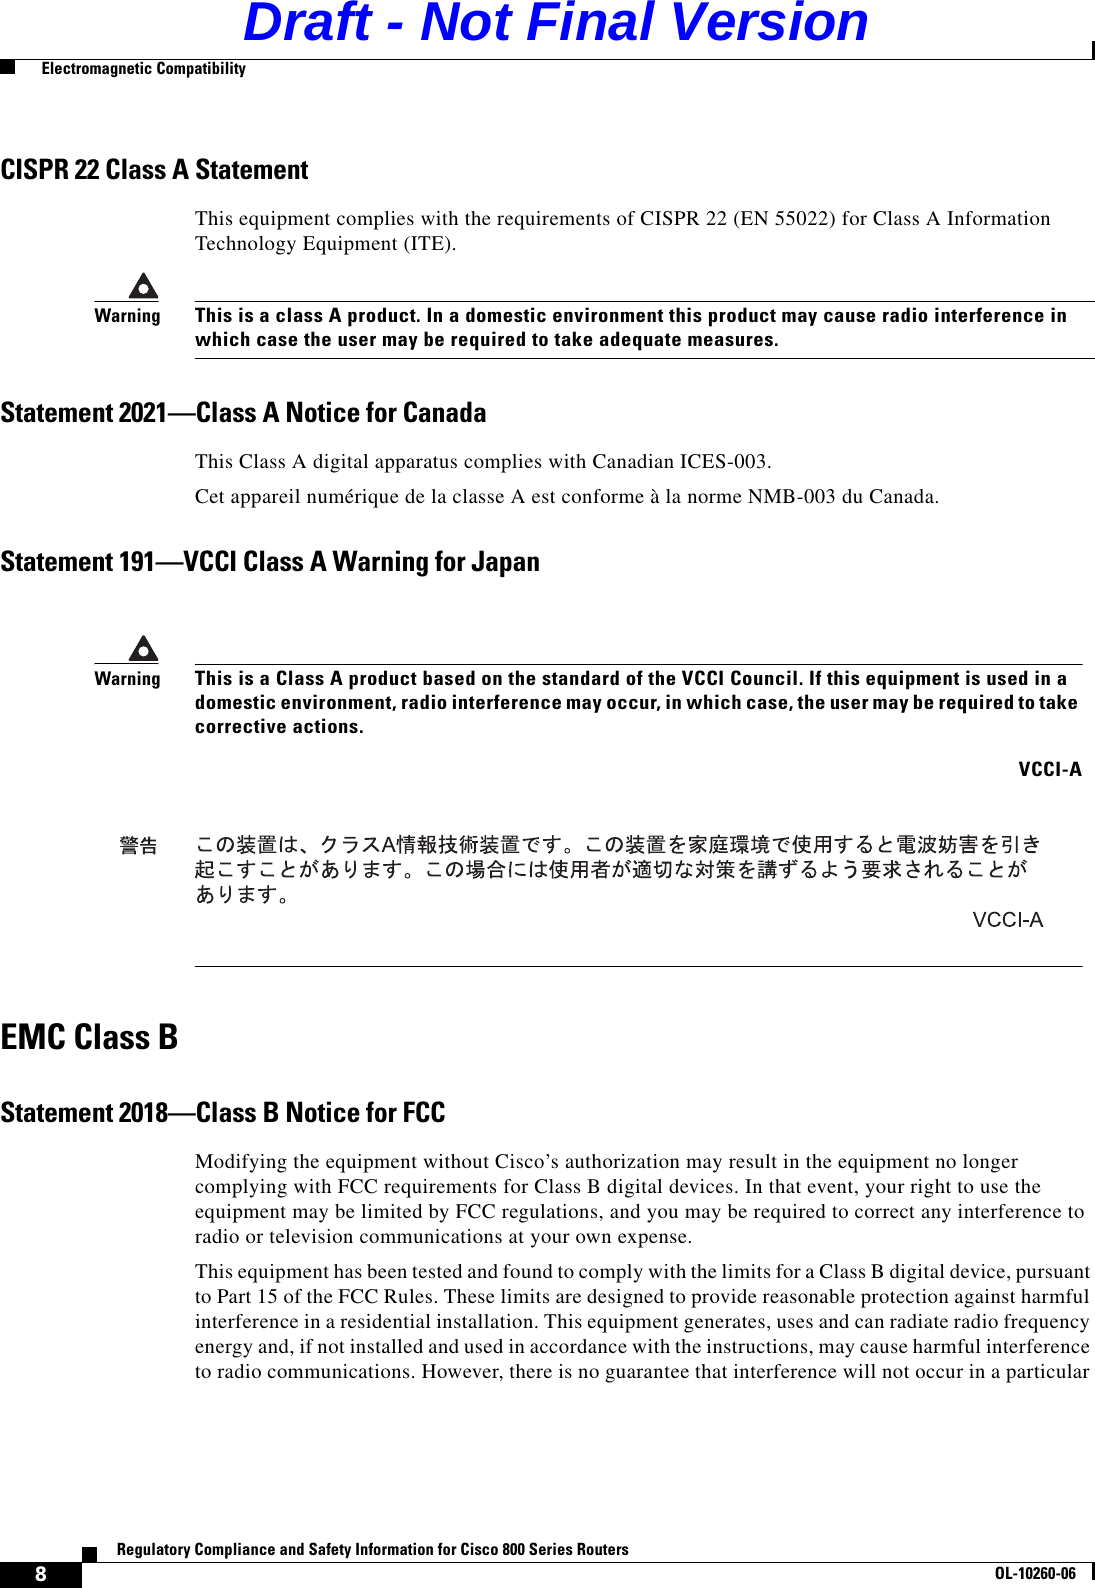 8Regulatory Compliance and Safety Information for Cisco 800 Series RoutersOL-10260-06  Electromagnetic CompatibilityCISPR 22 Class A StatementThis equipment complies with the requirements of CISPR 22 (EN 55022) for Class A Information Technology Equipment (ITE). WarningThis is a class A product. In a domestic environment this product may cause radio interference in which case the user may be required to take adequate measures.Statement 2021—Class A Notice for CanadaThis Class A digital apparatus complies with Canadian ICES-003.Cet appareil numérique de la classe A est conforme à la norme NMB-003 du Canada.Statement 191—VCCI Class A Warning for JapanEMC Class BStatement 2018—Class B Notice for FCCModifying the equipment without Cisco’s authorization may result in the equipment no longer complying with FCC requirements for Class B digital devices. In that event, your right to use the equipment may be limited by FCC regulations, and you may be required to correct any interference to radio or television communications at your own expense.This equipment has been tested and found to comply with the limits for a Class B digital device, pursuant to Part 15 of the FCC Rules. These limits are designed to provide reasonable protection against harmful interference in a residential installation. This equipment generates, uses and can radiate radio frequency energy and, if not installed and used in accordance with the instructions, may cause harmful interference to radio communications. However, there is no guarantee that interference will not occur in a particular WarningThis is a Class A product based on the standard of the VCCI Council. If this equipment is used in a domestic environment, radio interference may occur, in which case, the user may be required to take corrective actions.VCCI-ADraft - Not Final Version